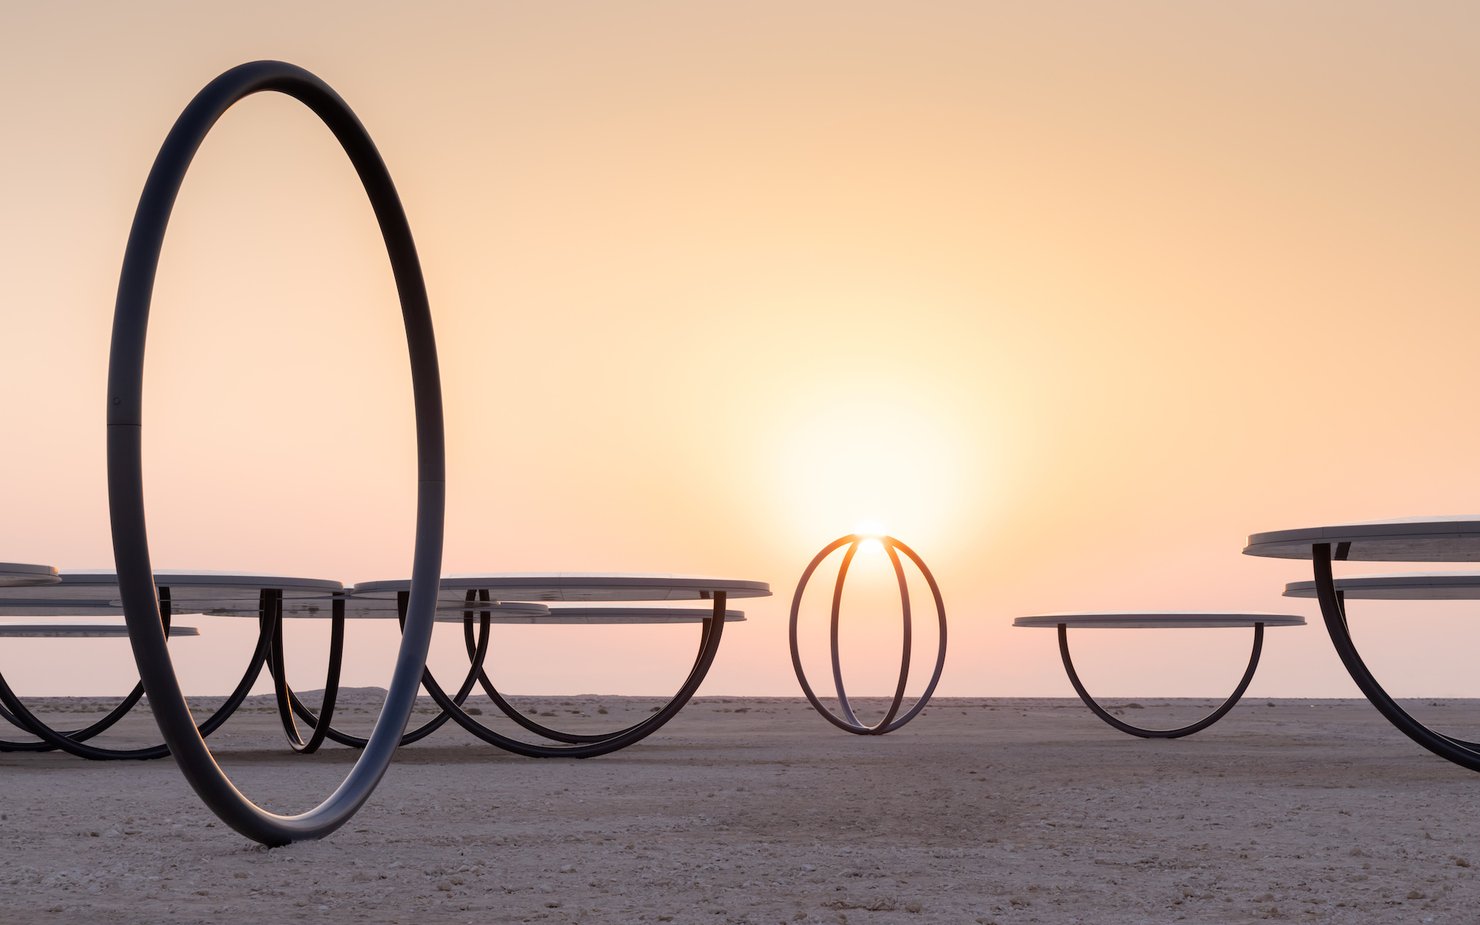 Circular shelters and rings placed in a desert landscape